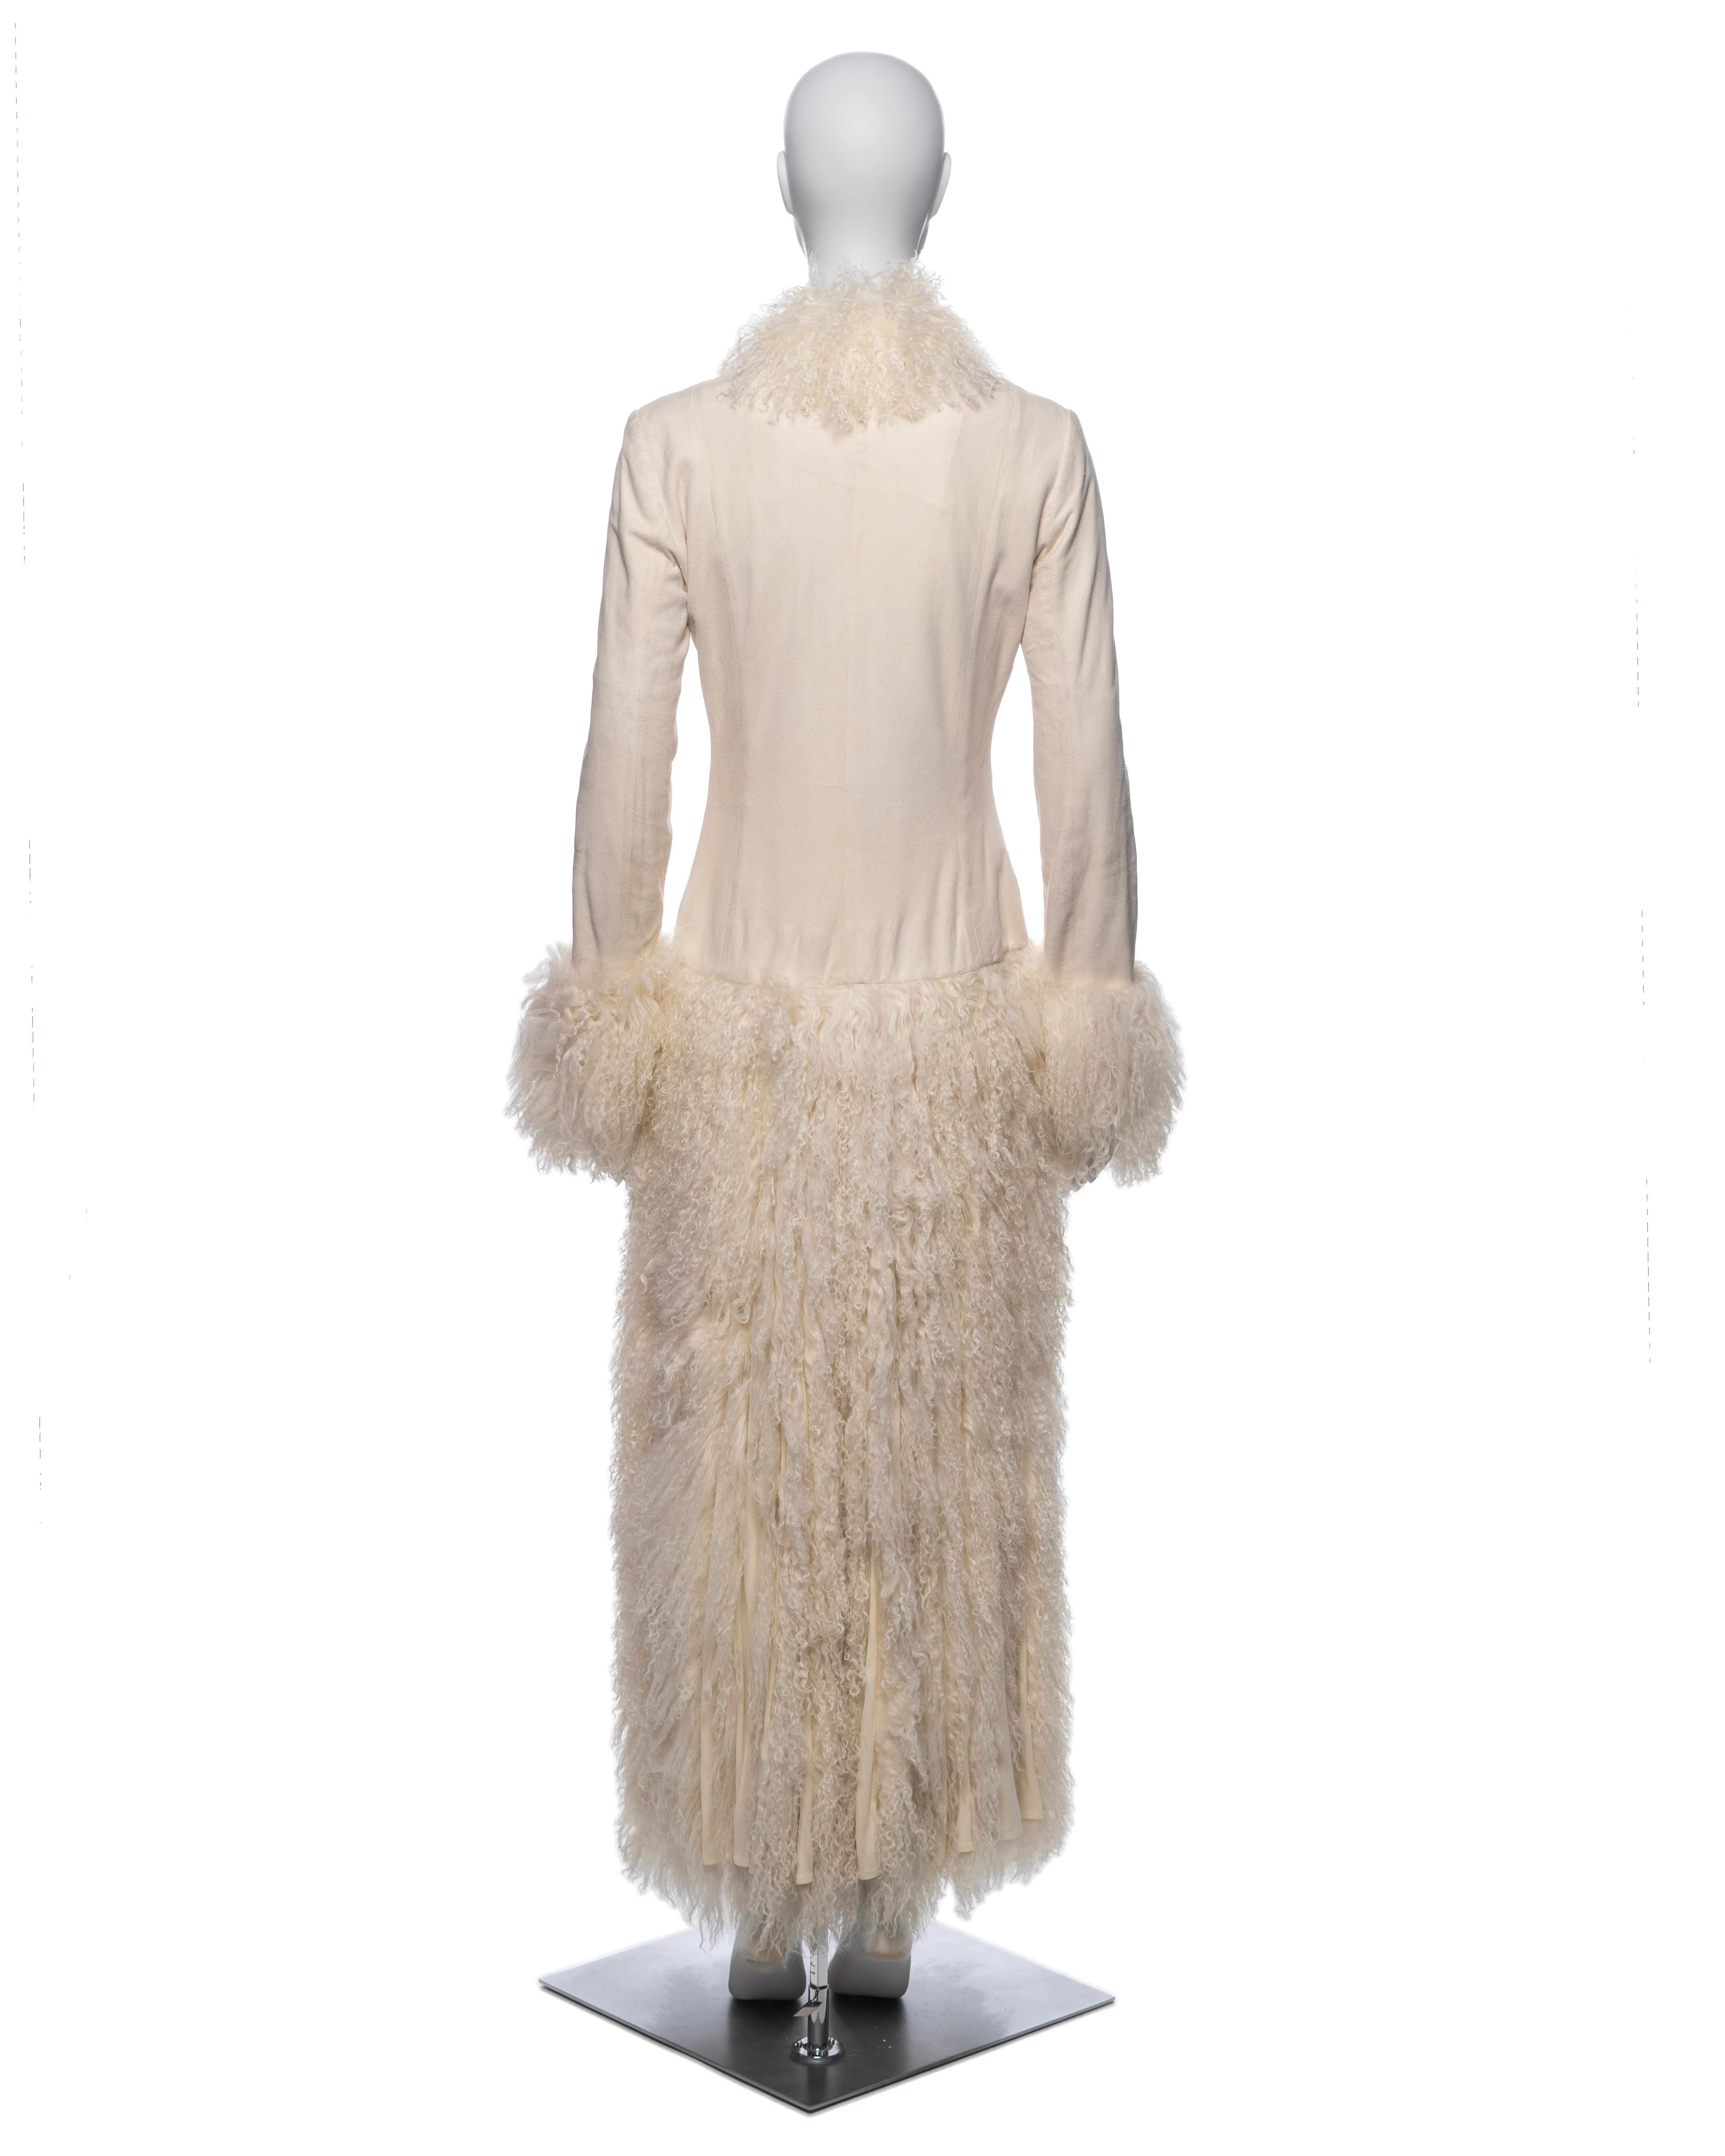 Jean Paul Gaultier White Mongolian Lamb Fur and Leather Coat Dress, FW 2006 For Sale 8